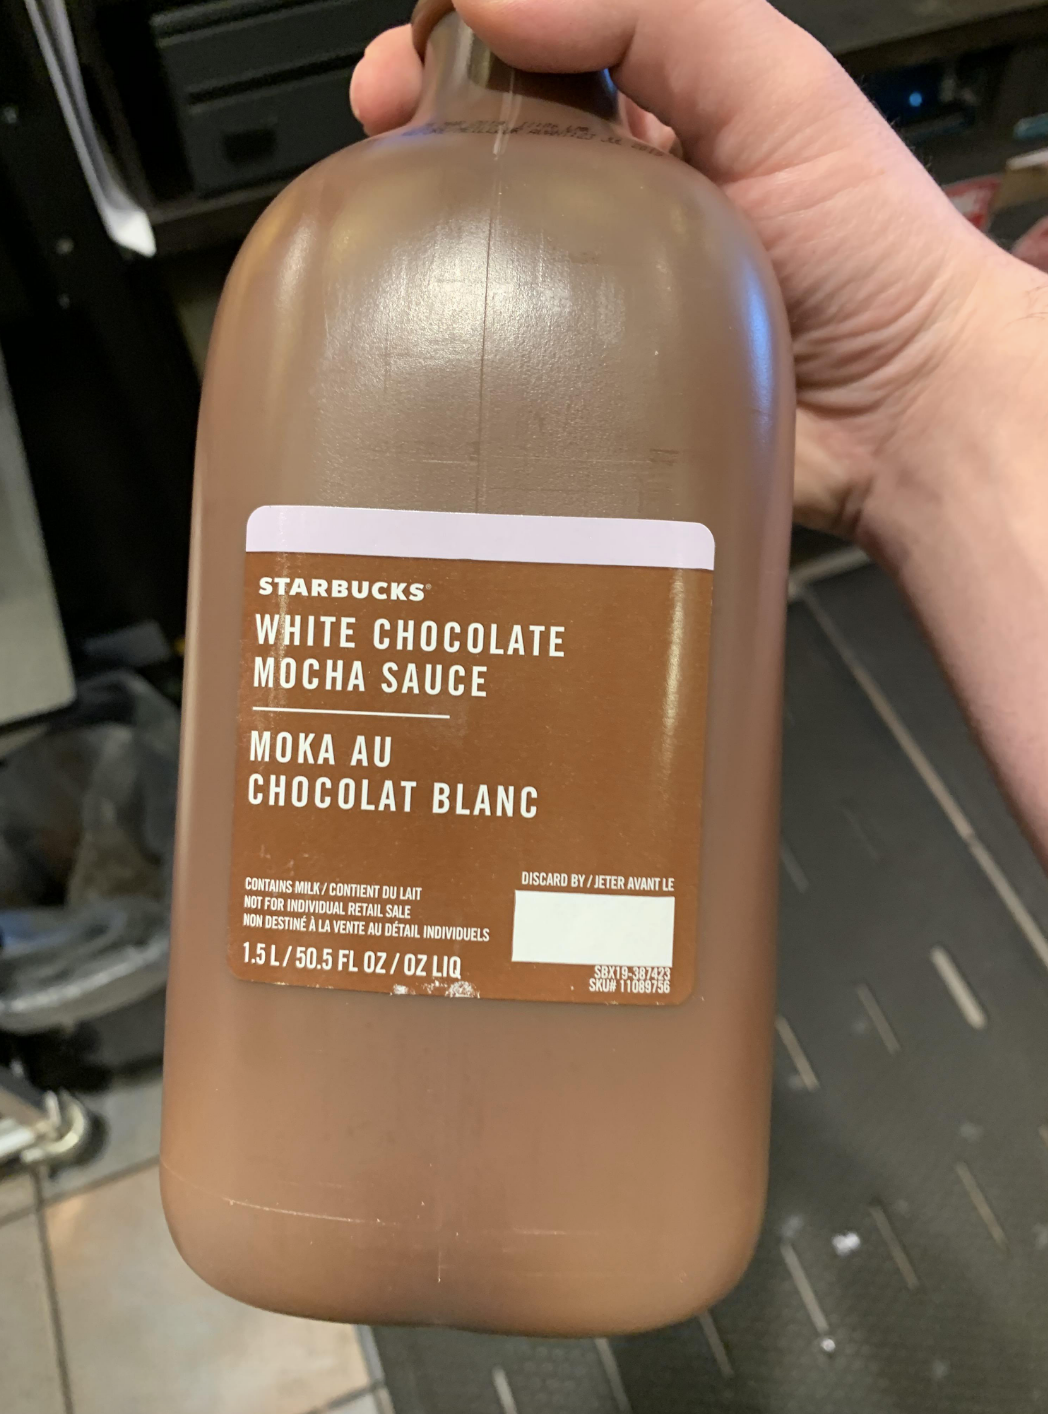 A white chocolate mocha sauce that is in a brown bottle, making it indistinguishable from the regular chocolate bottle